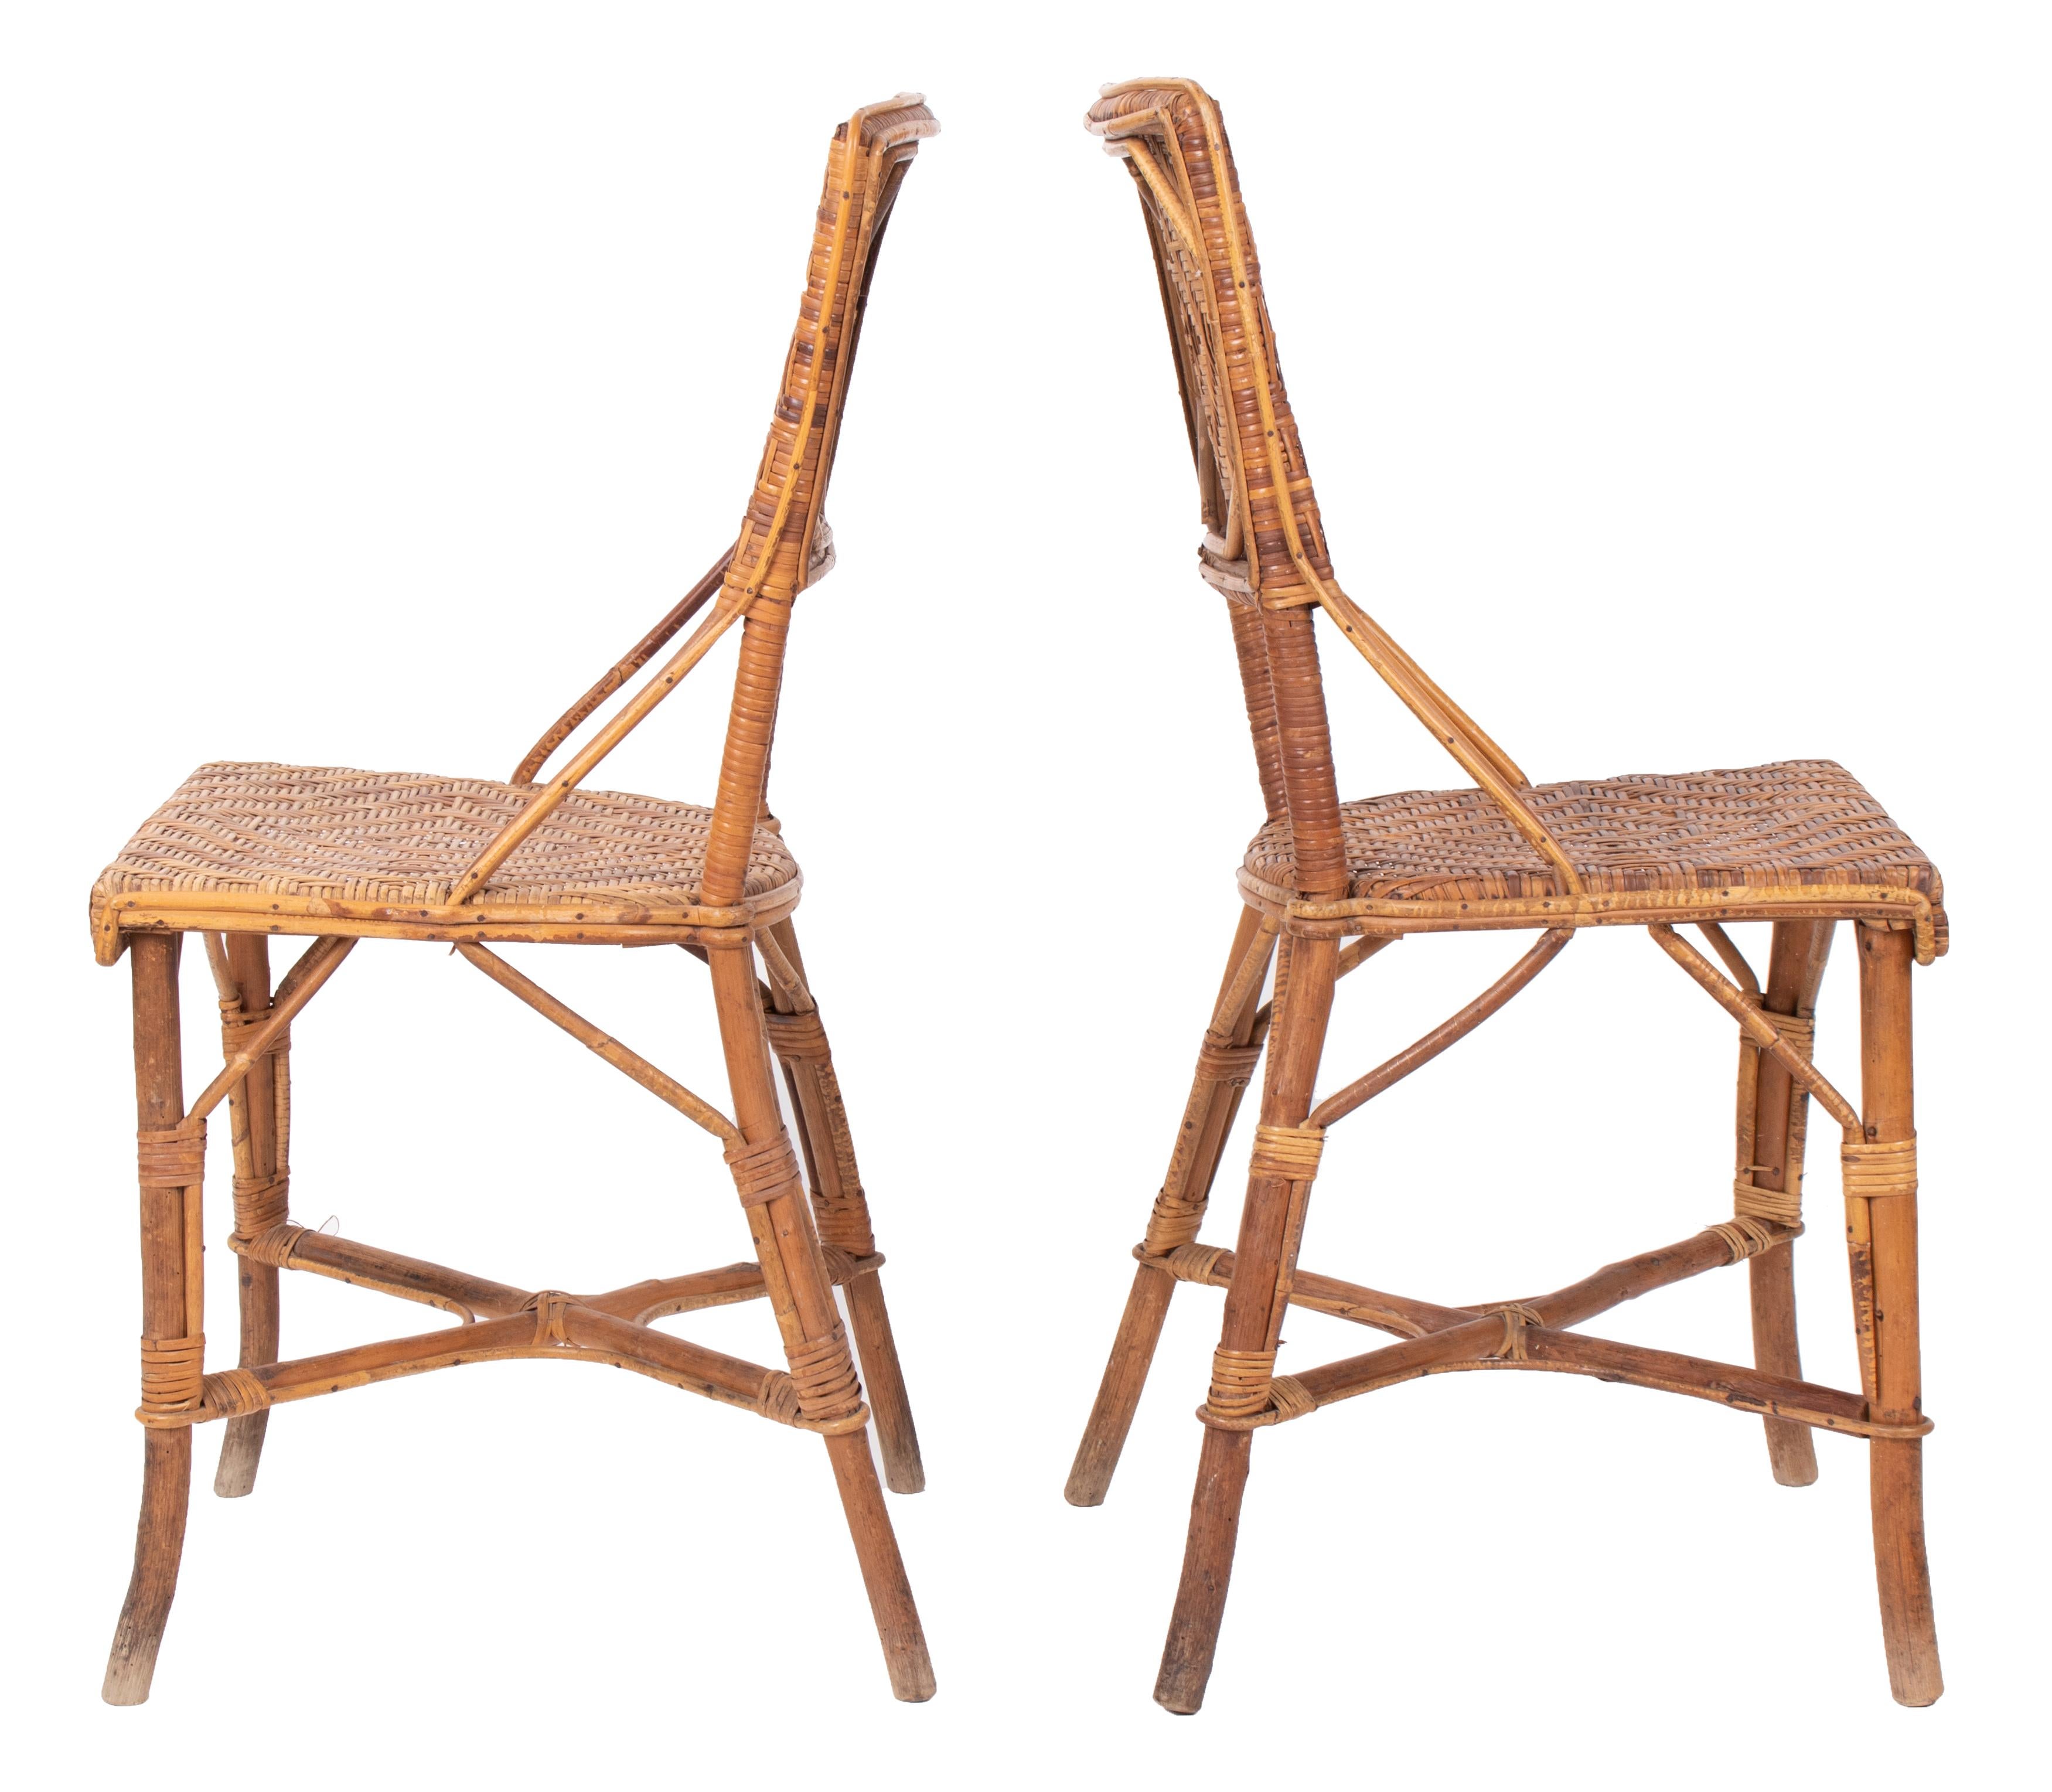 20th Century 1970s Pair of Spanish Bamboo and Wood Chairs